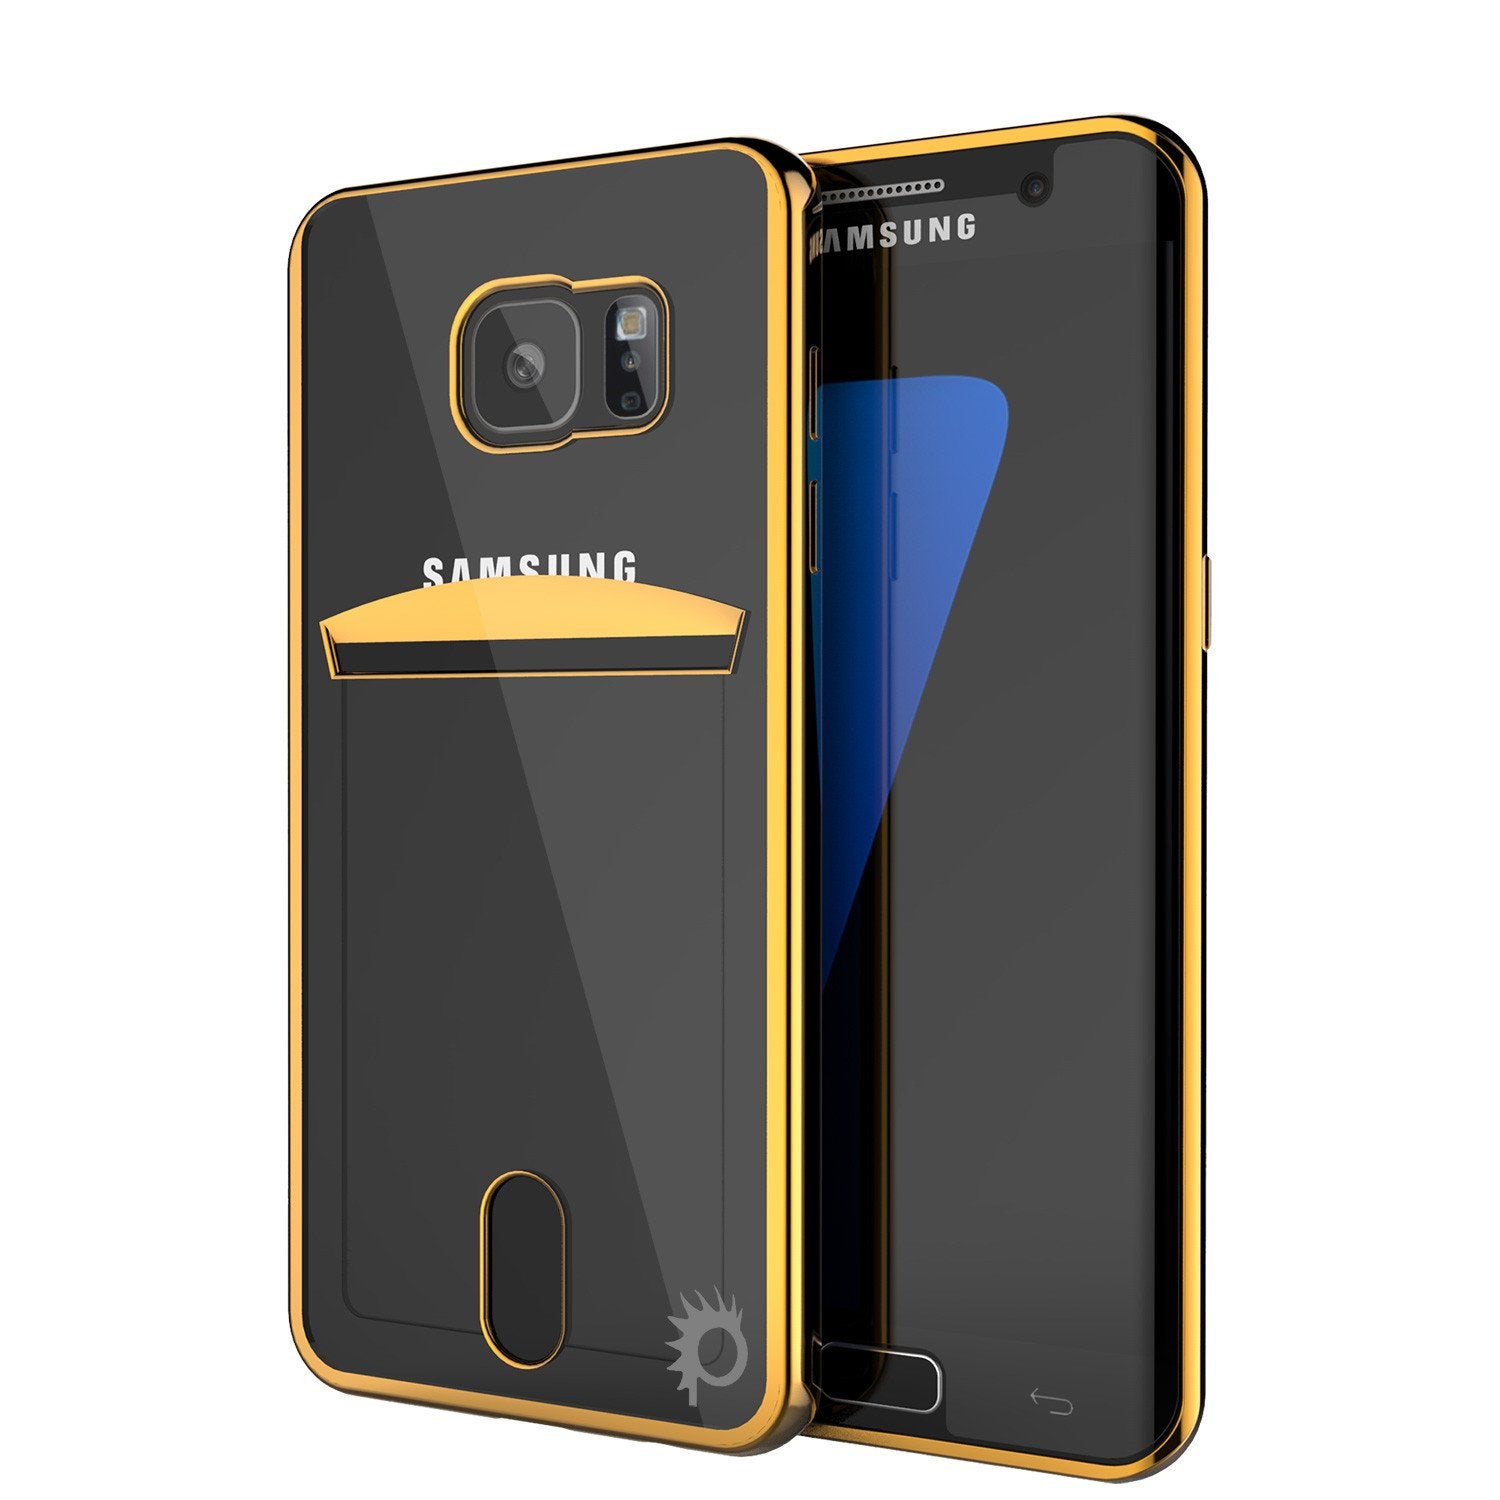 Galaxy S7 Case, PUNKCASE® LUCID Gold Series | Card Slot